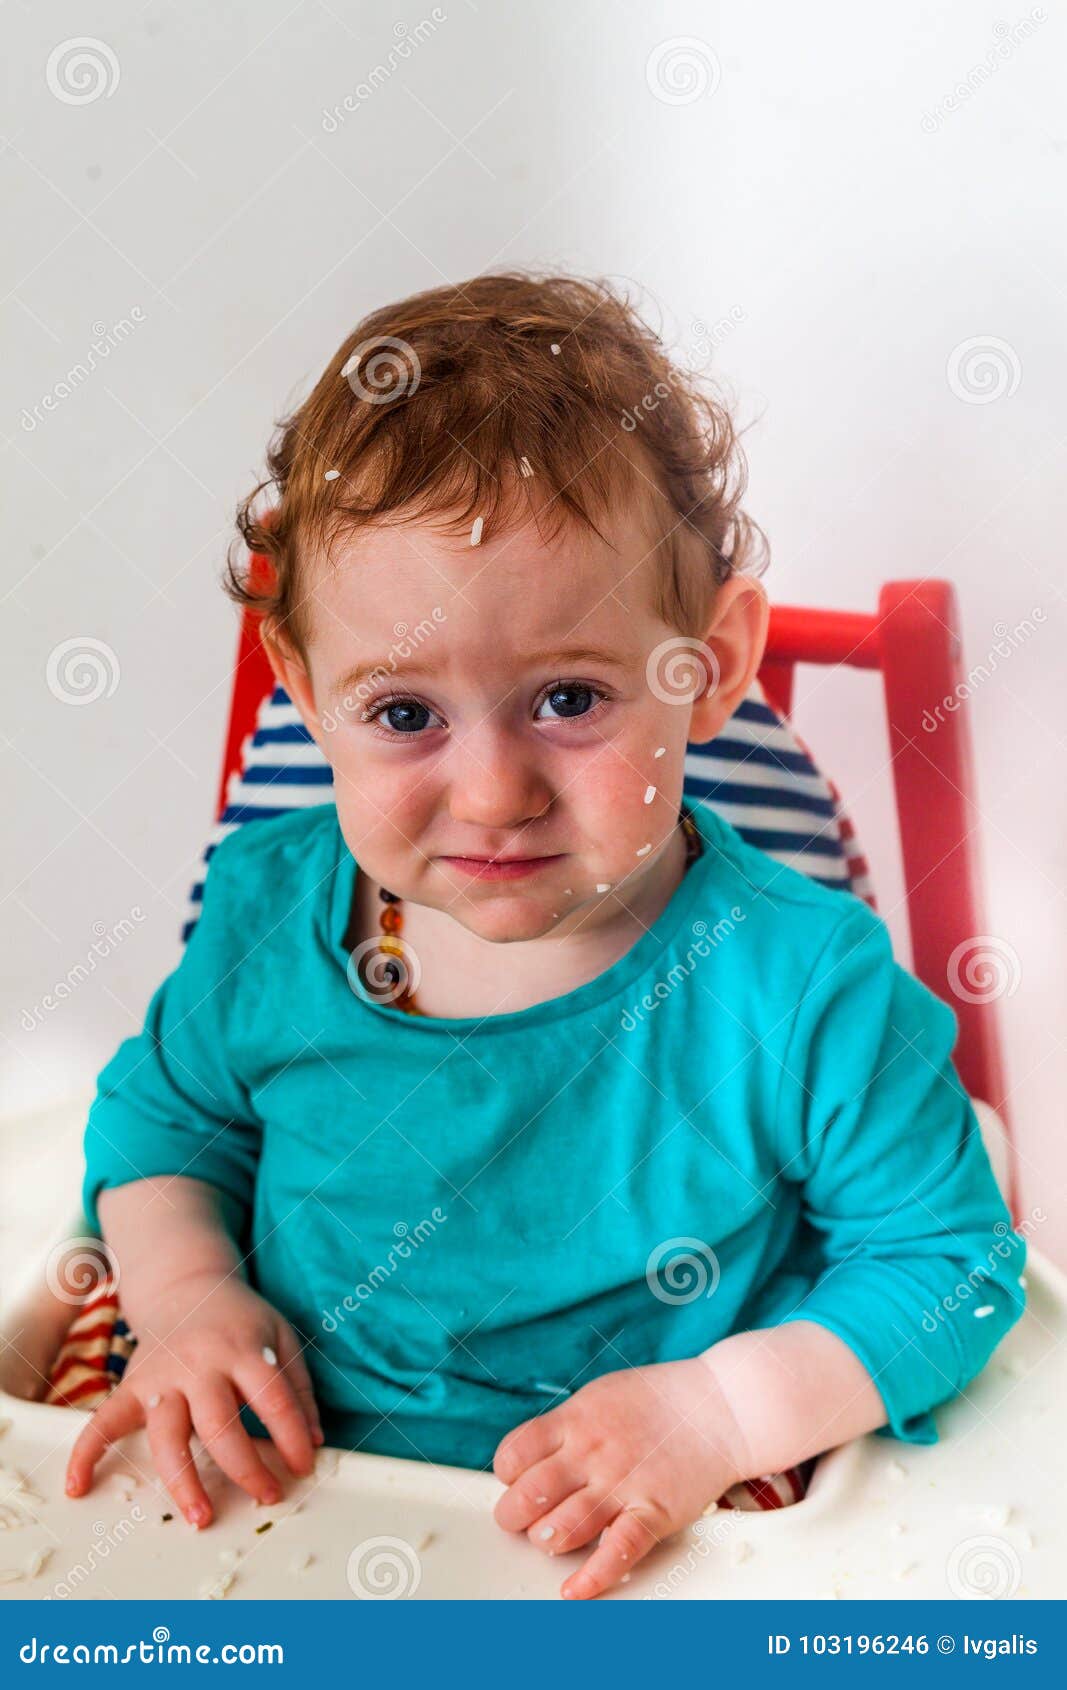 Eating rice is so weird stock photo. Image of childhood - 103196246